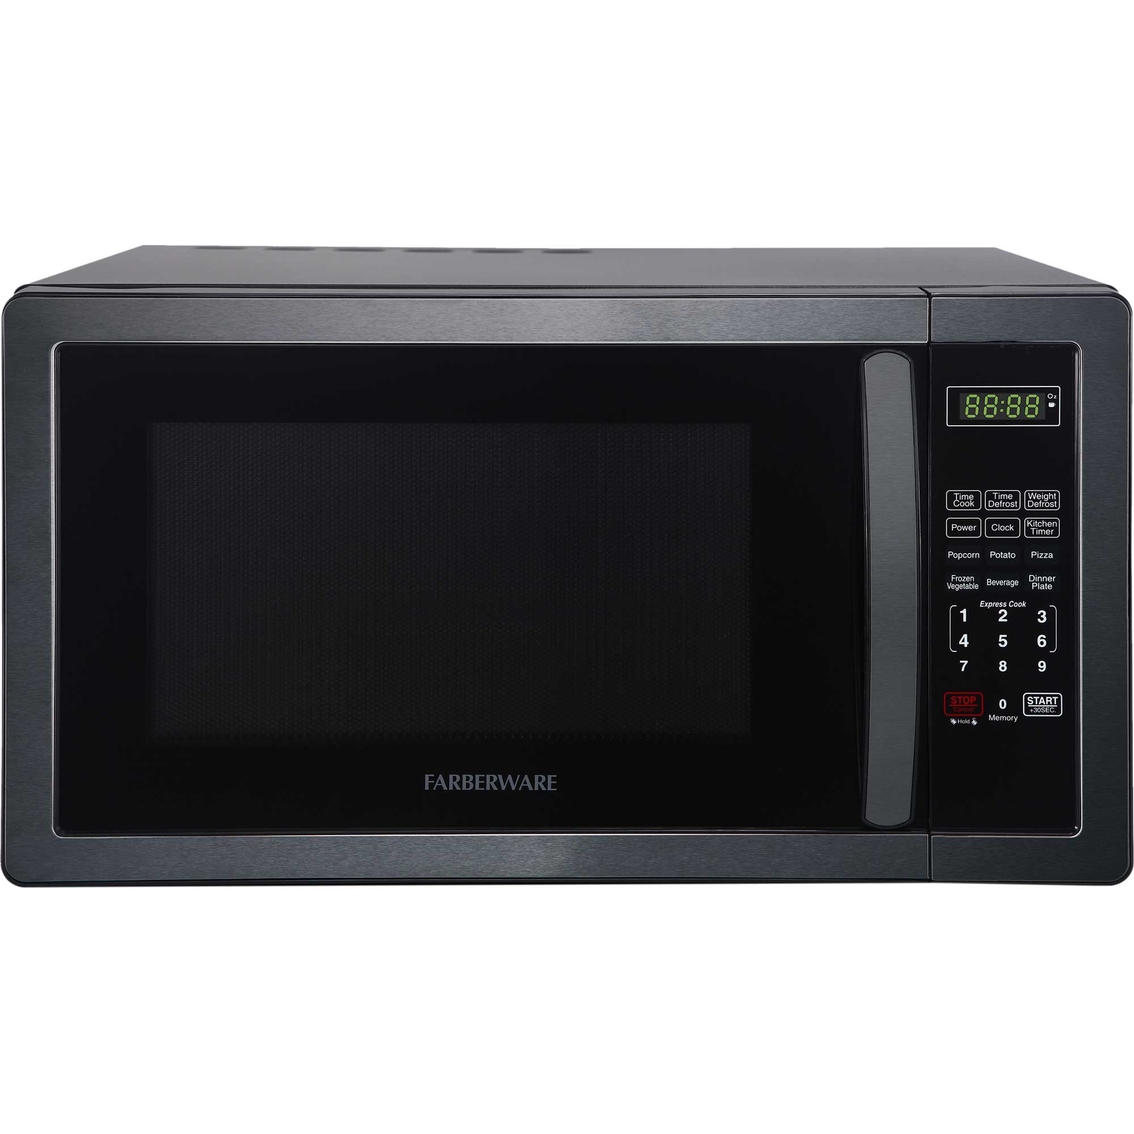 Farberware Classic 1.1 Cu. Ft. 1000w Microwave Oven In Black Stainless  Steel, Microwave Ovens, Furniture & Appliances